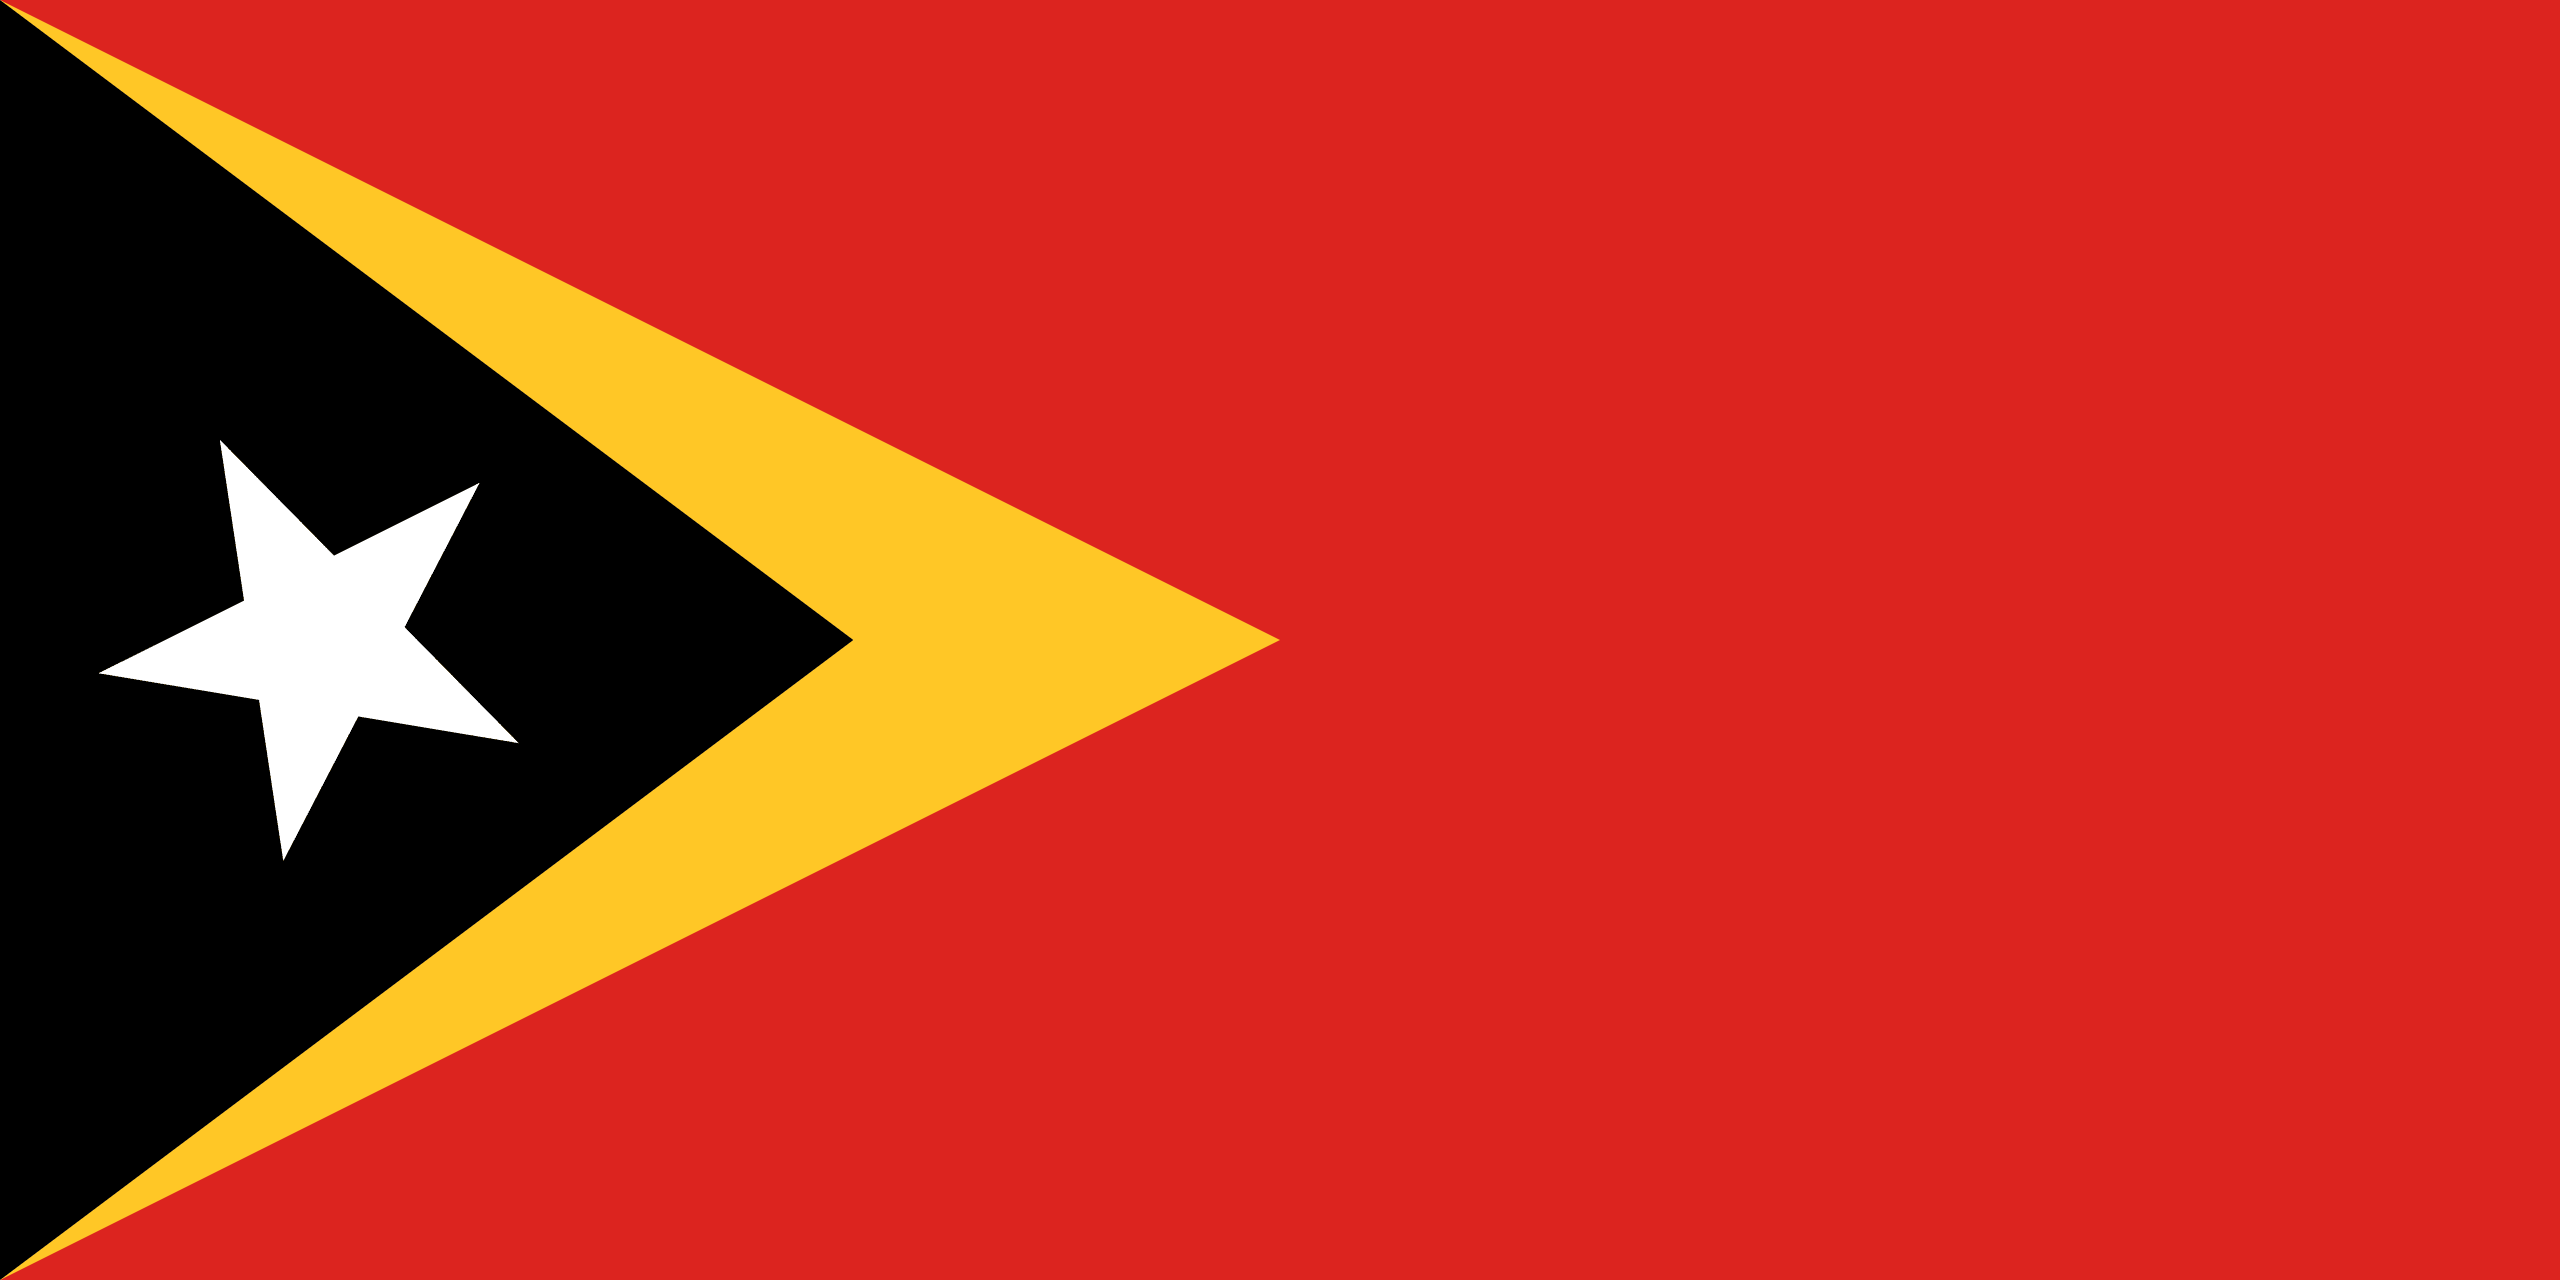 Timor-Leste: Meaning and History of the Timor-Leste Flag - Adoption, Colors, and Symbols